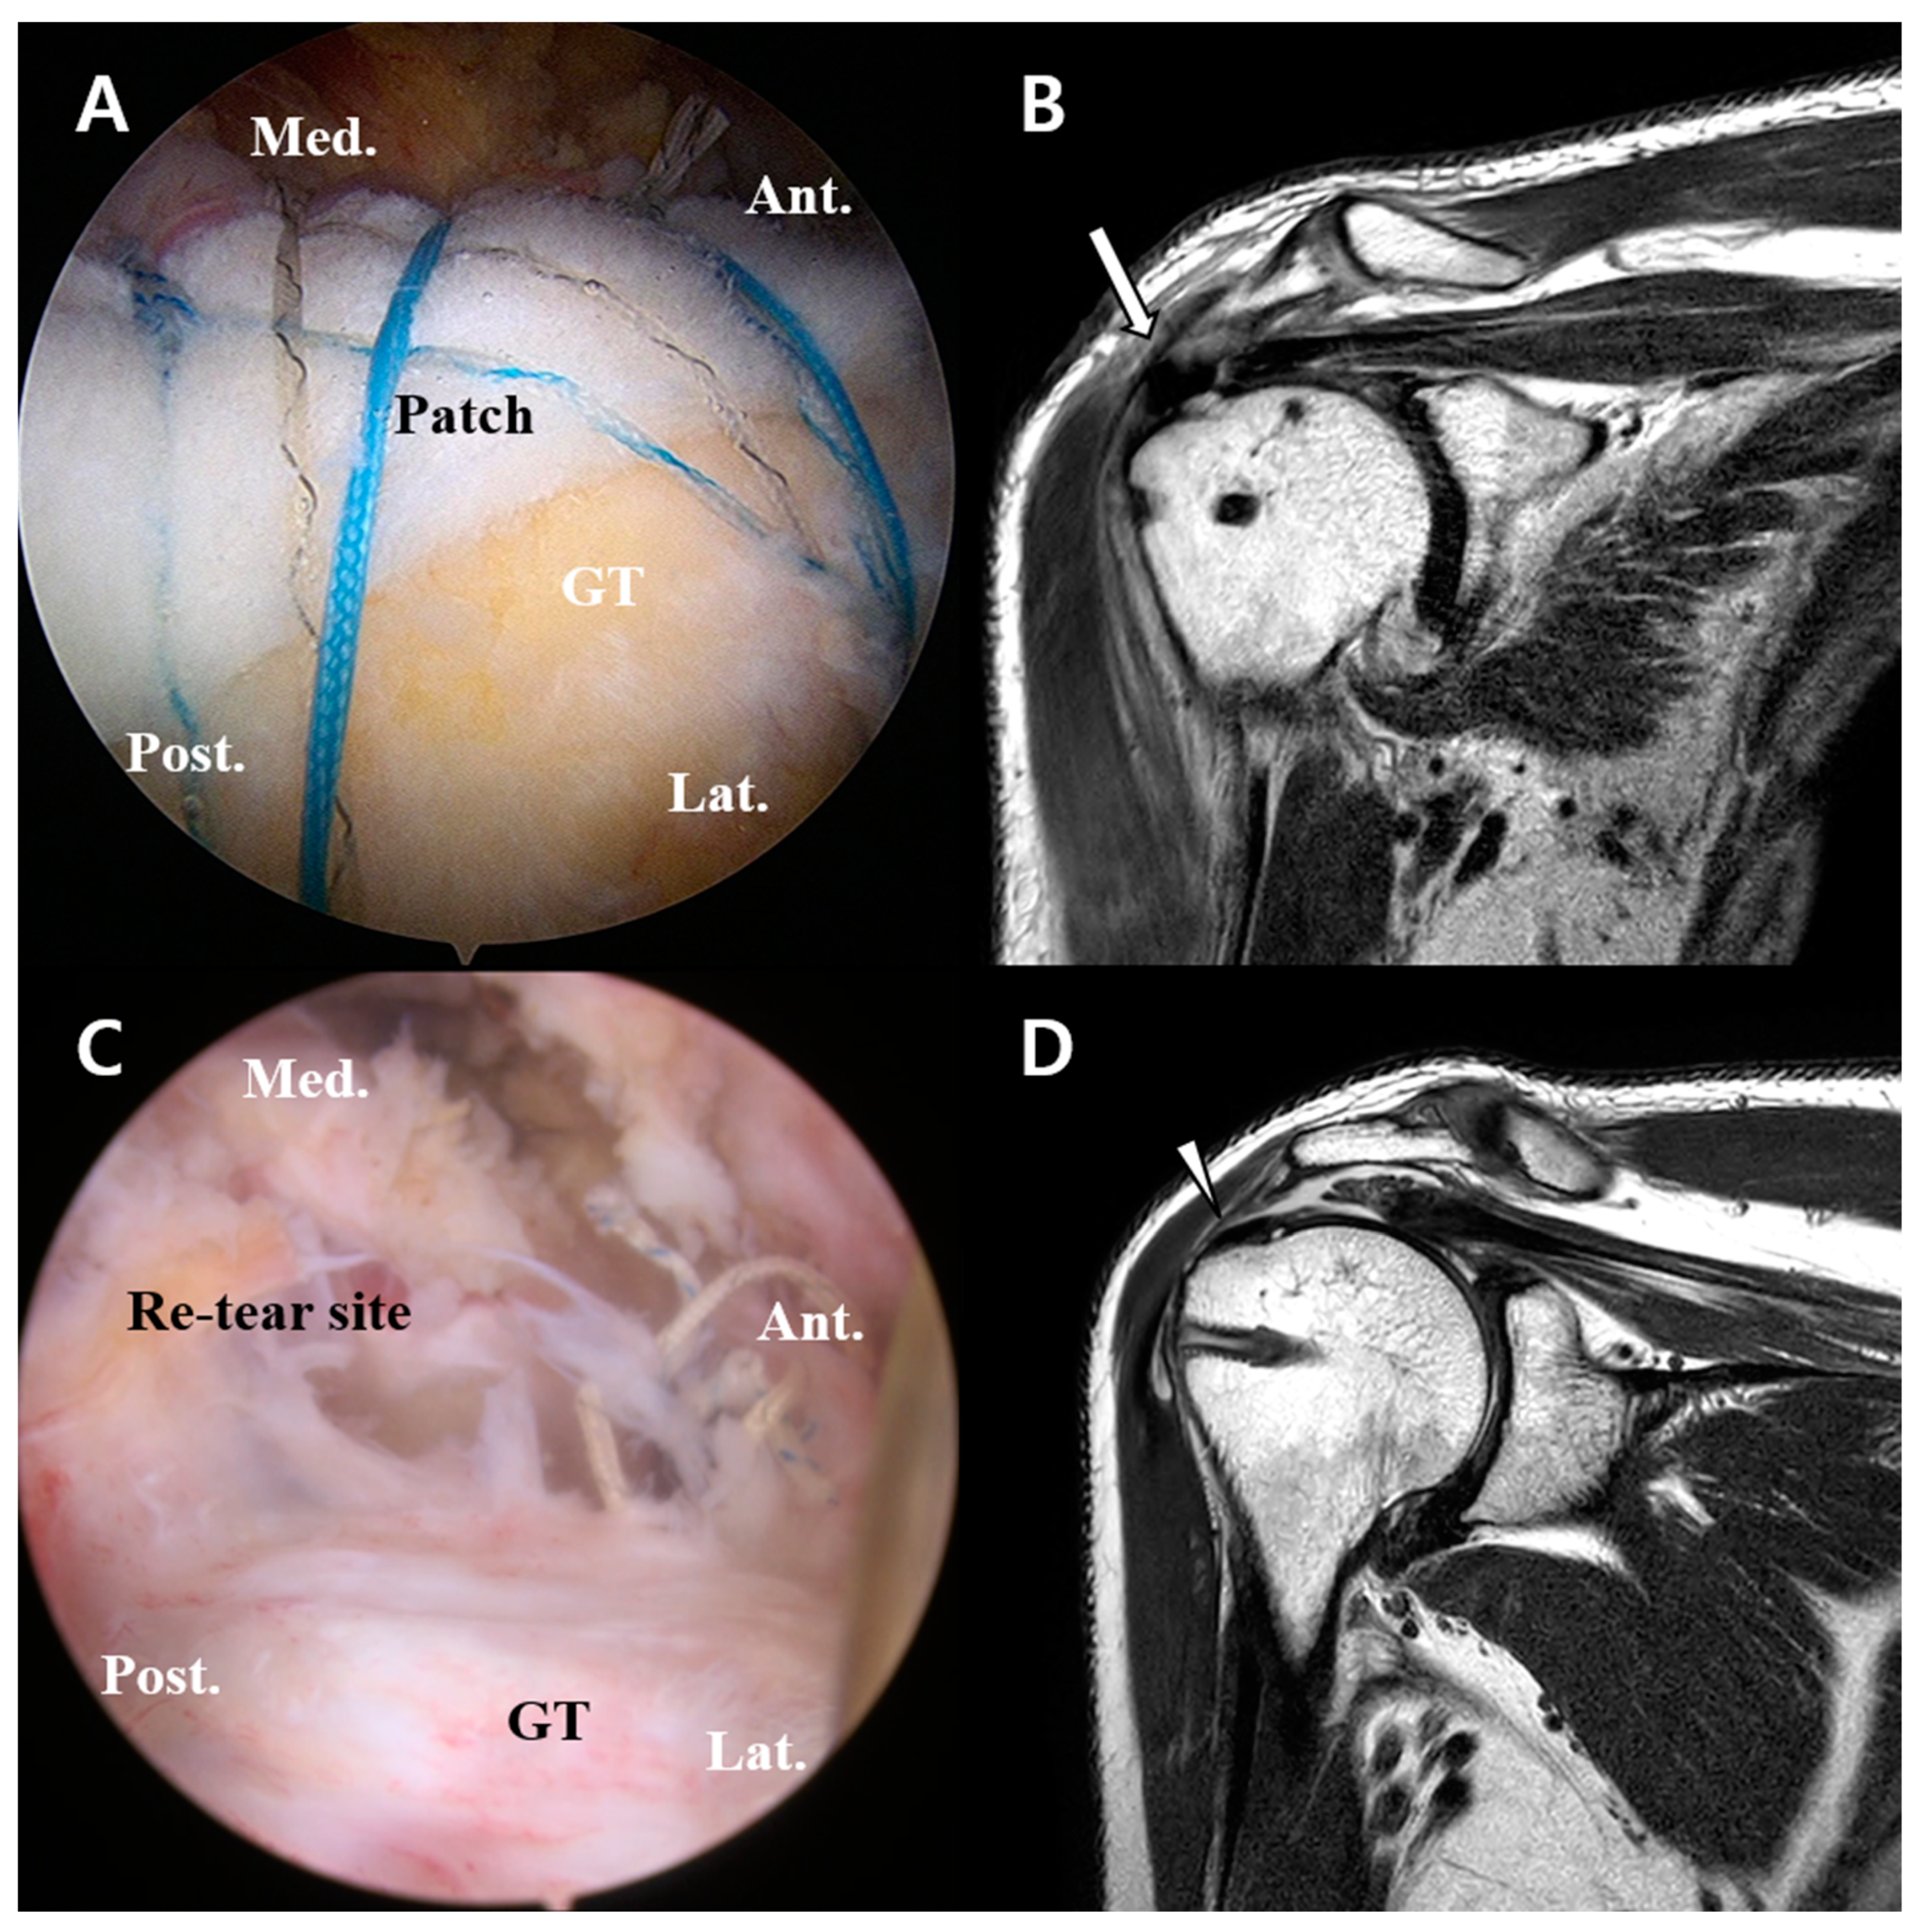 Arthroscopic view of the rotator cuff repair. Picture a shows the large